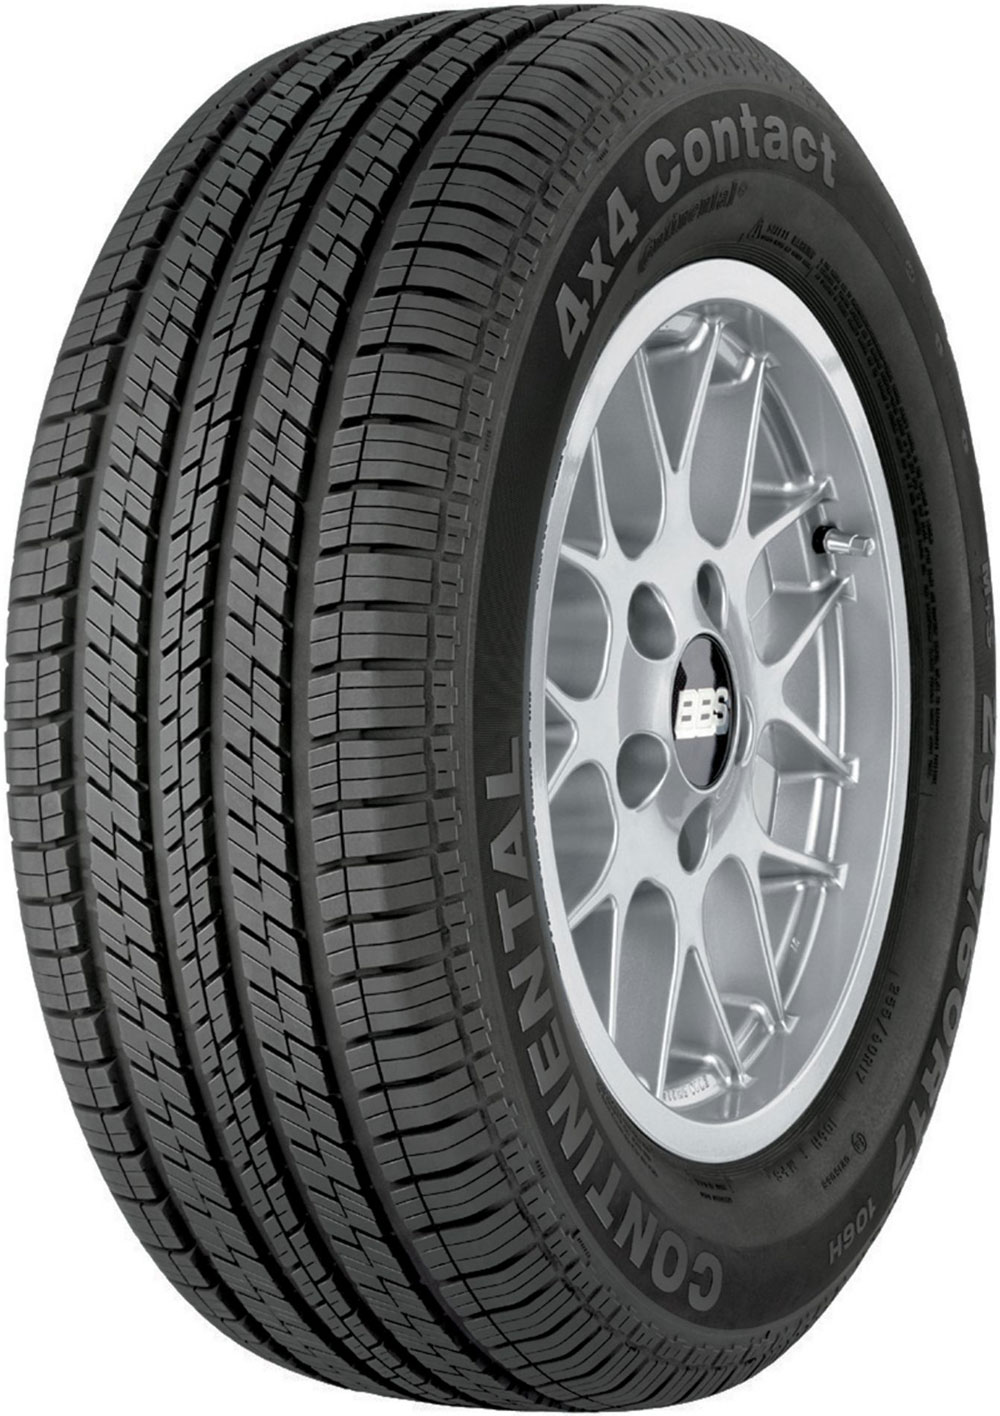 CONTINENTAL 4X4 CONTACT # 215/65 R16 98H